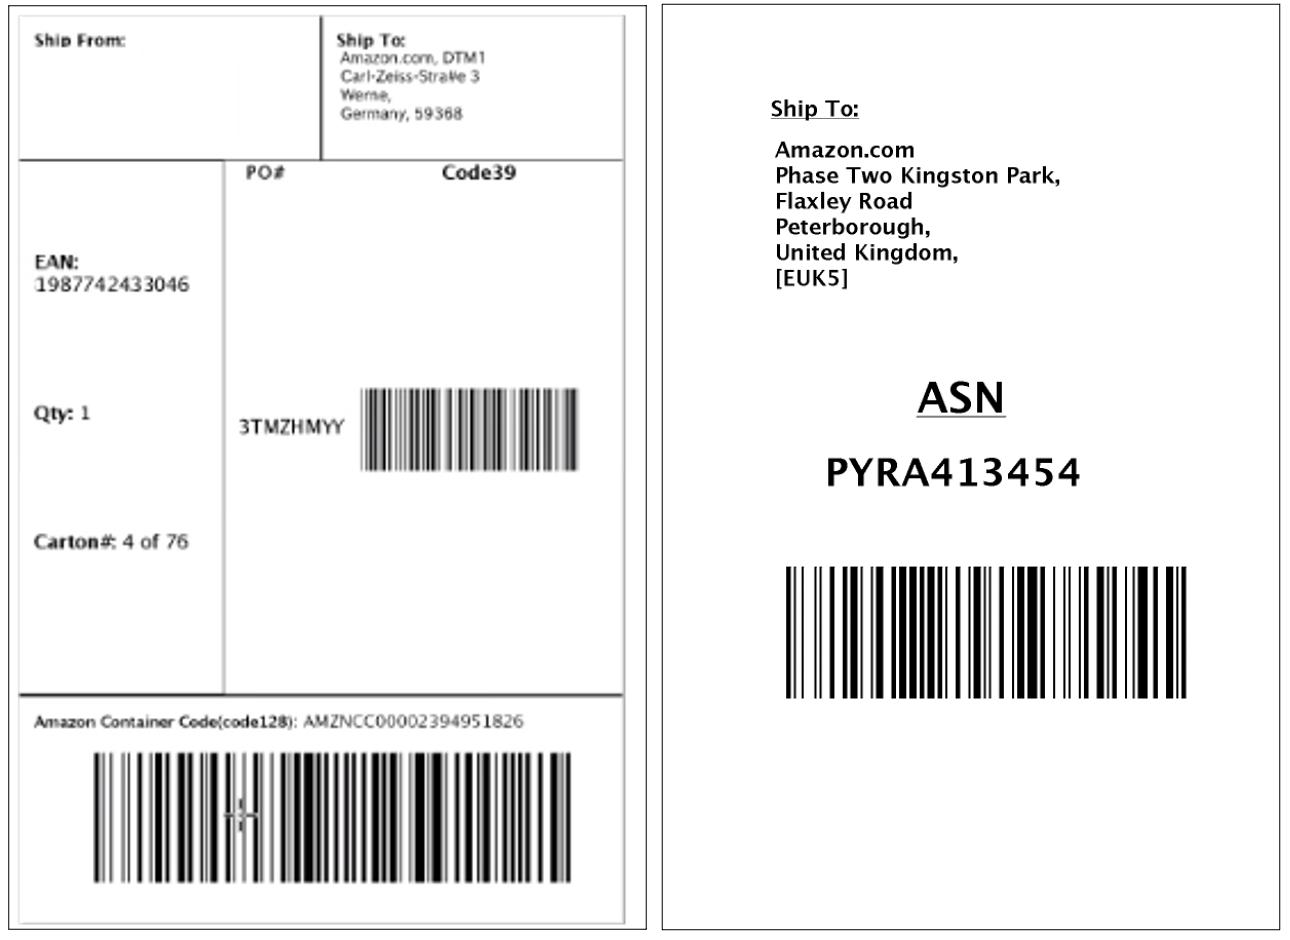 Example of separate ASN and carton label